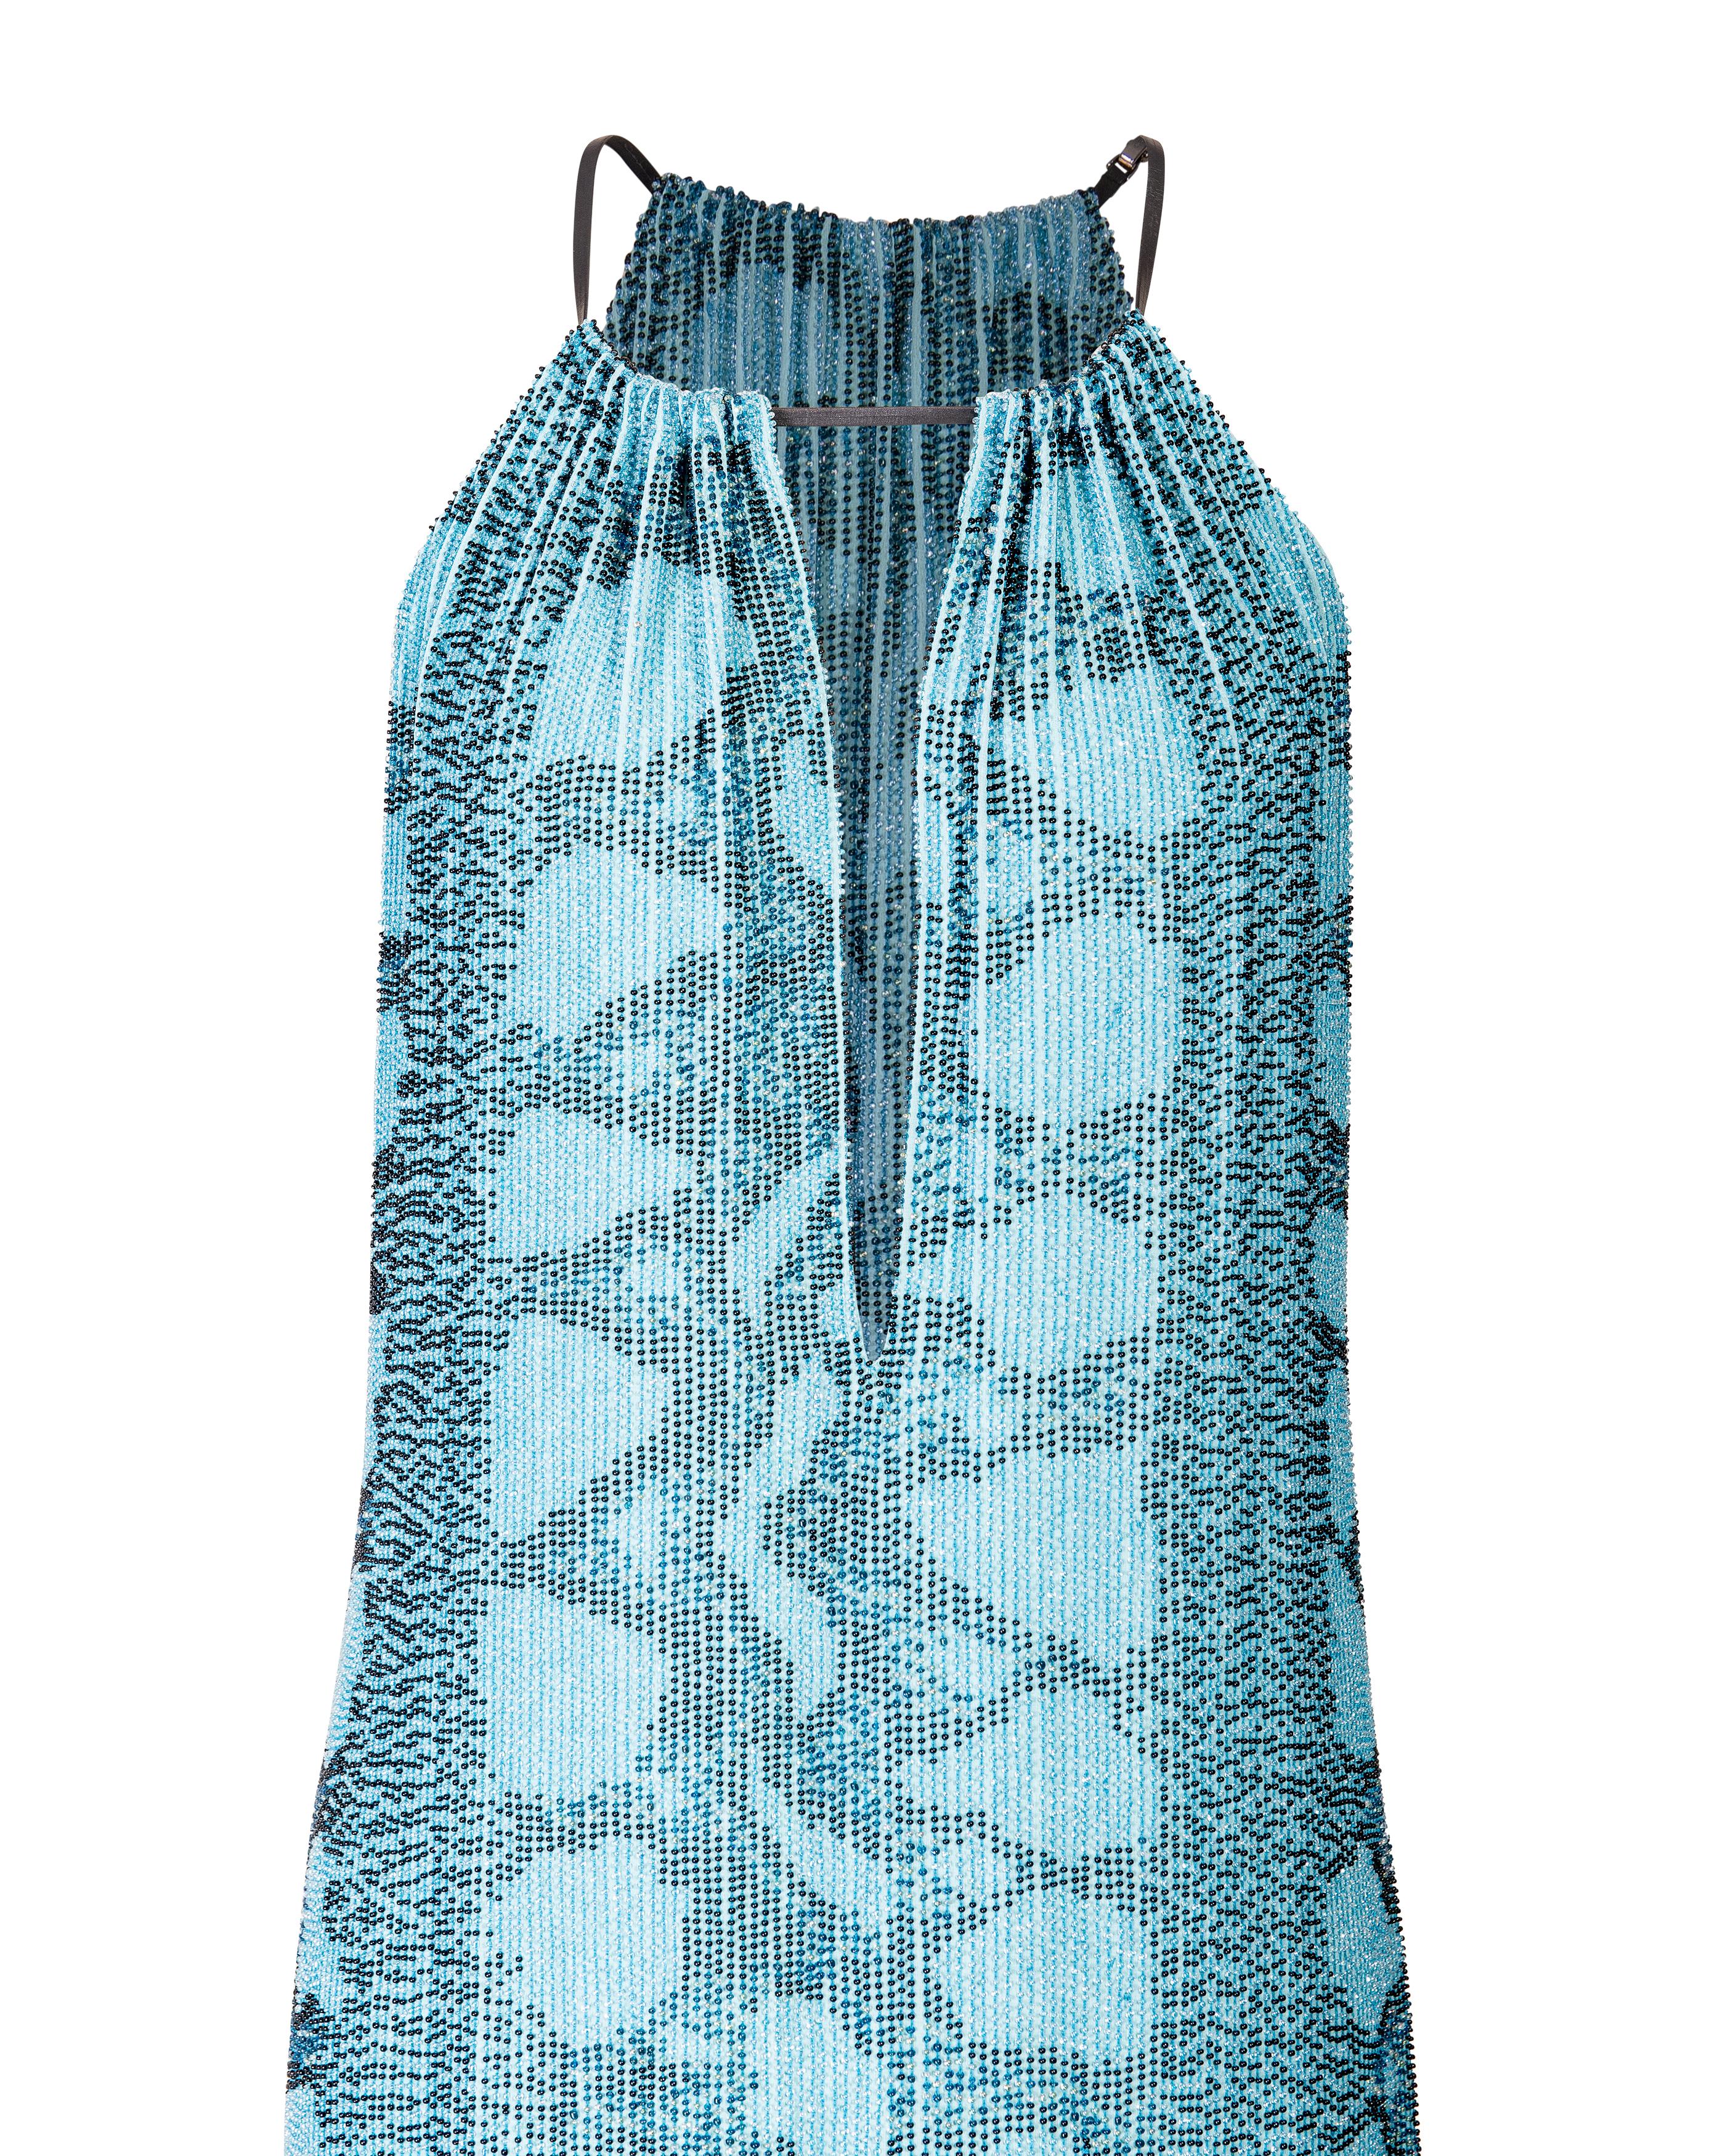 Women's S/S 2000 Gucci by Tom Ford Fully Beaded Turquoise Snakeskin Pattern Dress